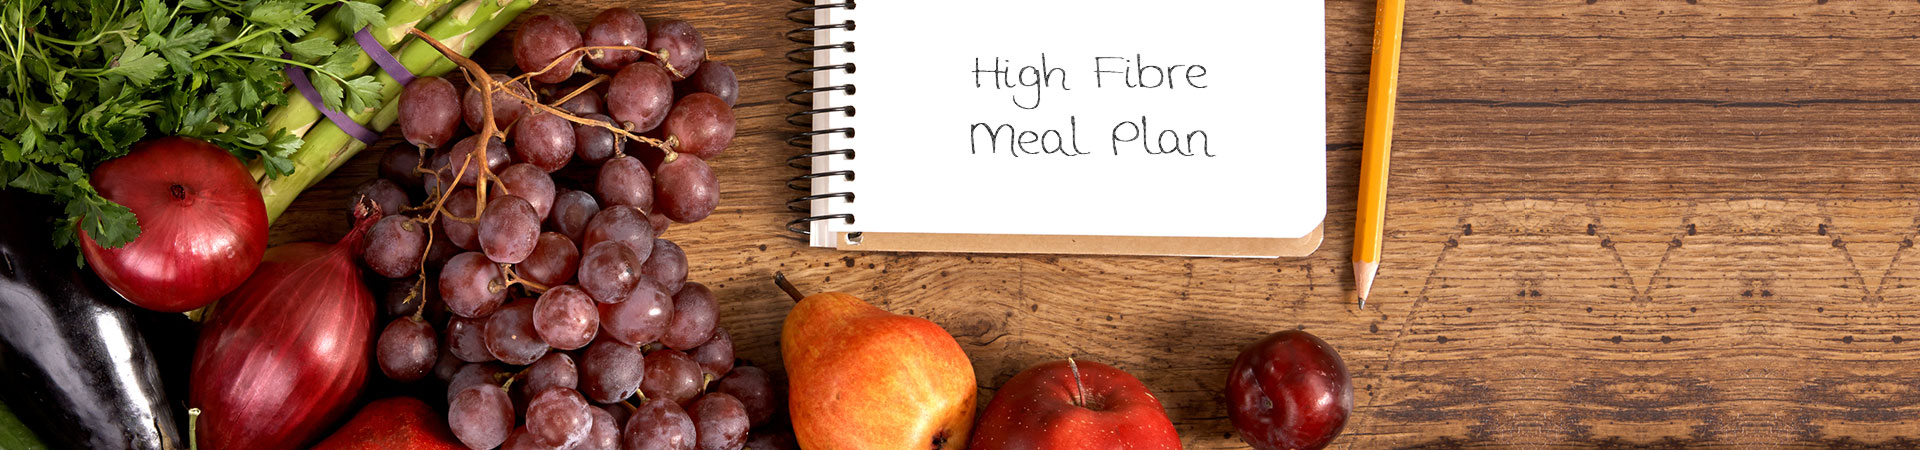 A wooden countertop with a selection of fruits and vegetables displayed alongside a notebook with the words "High Fibre Meal Plan".